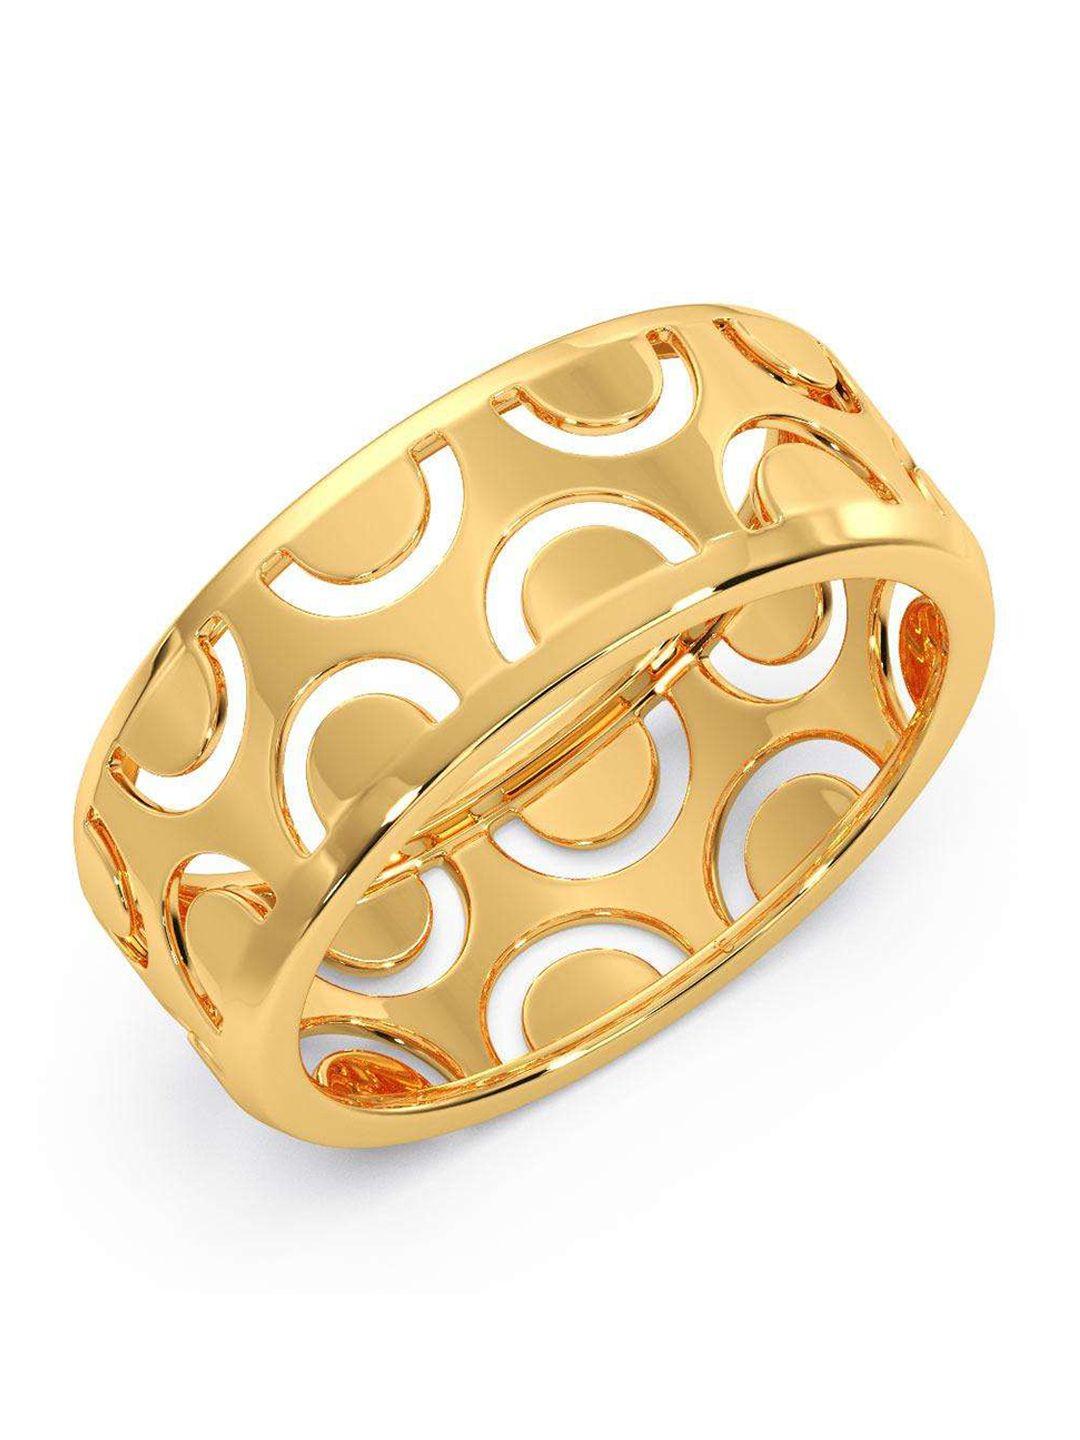 candere-a-kalyan-jewellers-company-men-18kt-gold-ring-4.61gm